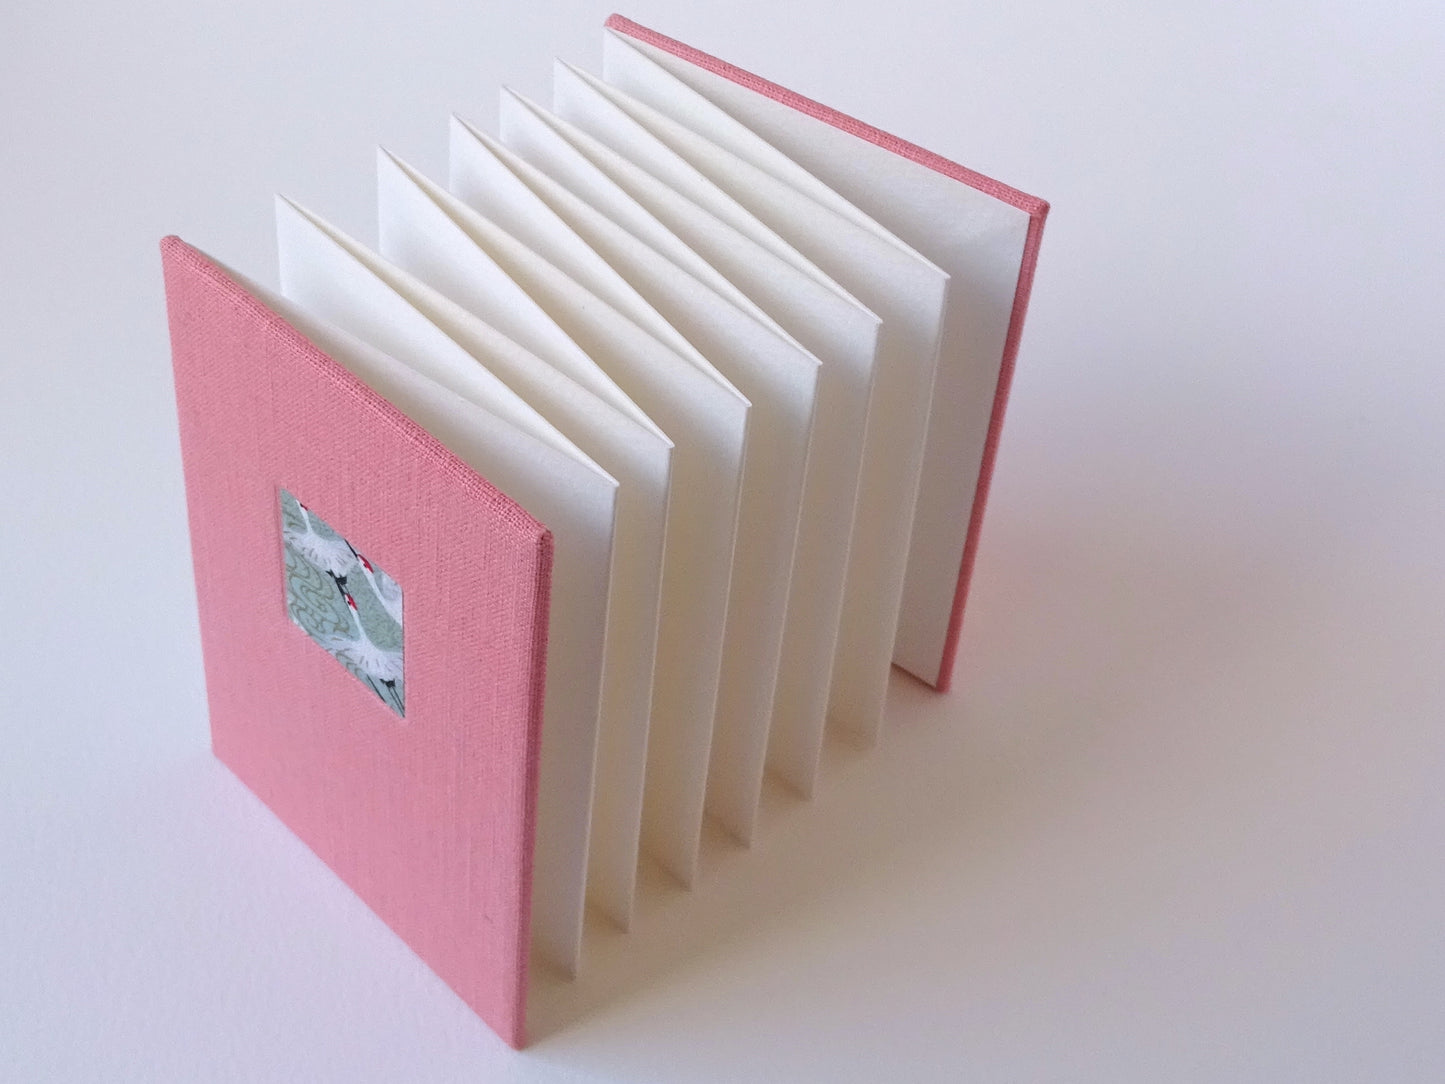 Celandine books coral pink linen concertina watercolour sketchbook with chiyogami standing